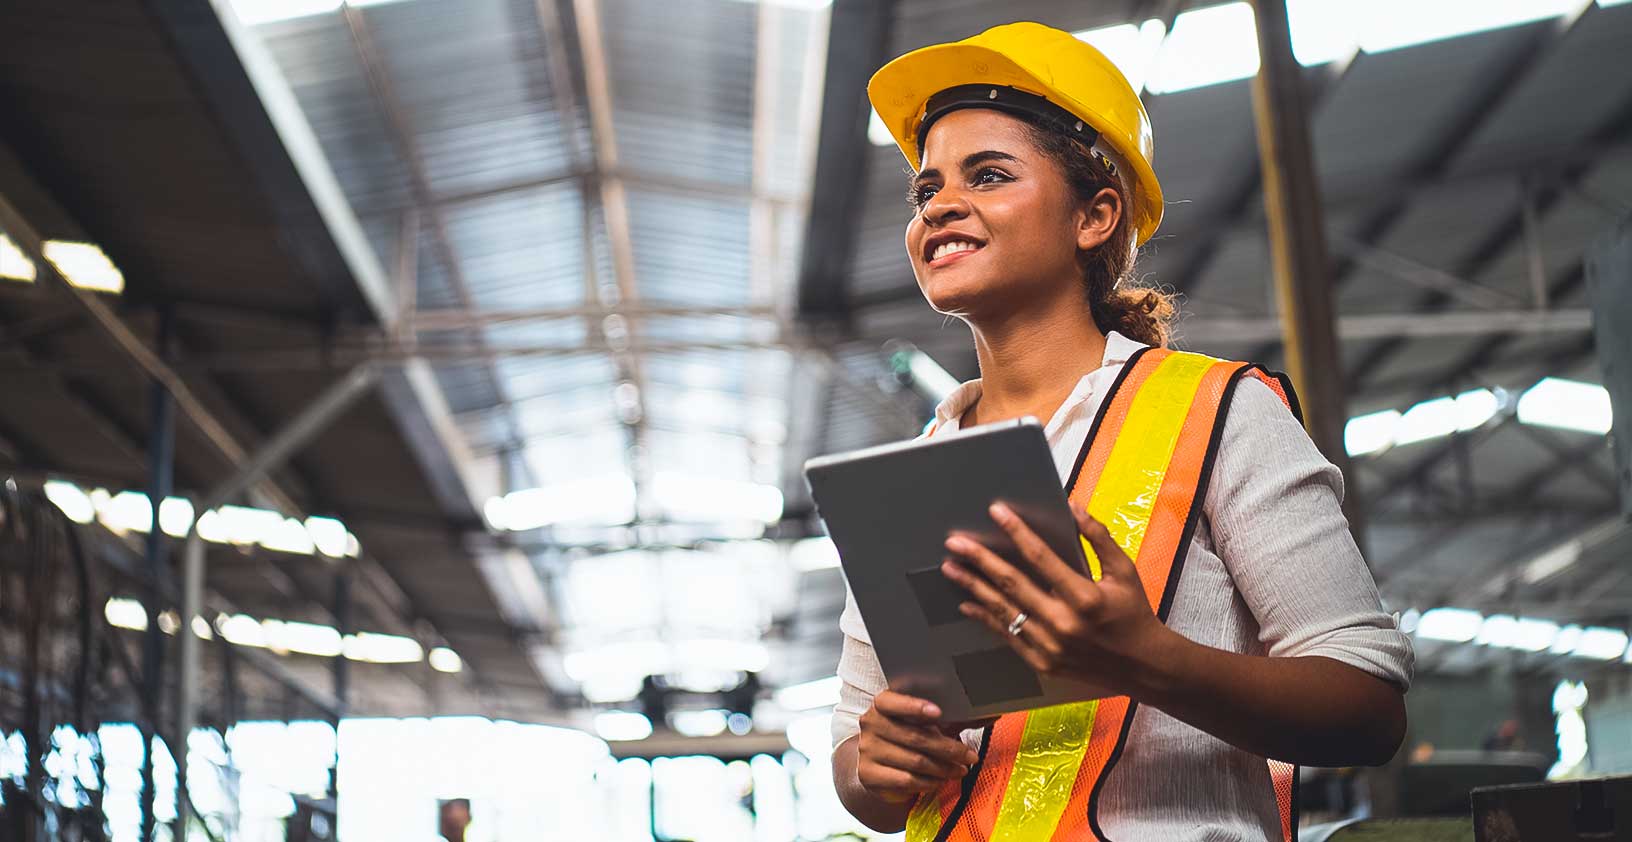 Portrait of industrial worker standing with tablet holding in her hand, conducting building asset maintenance